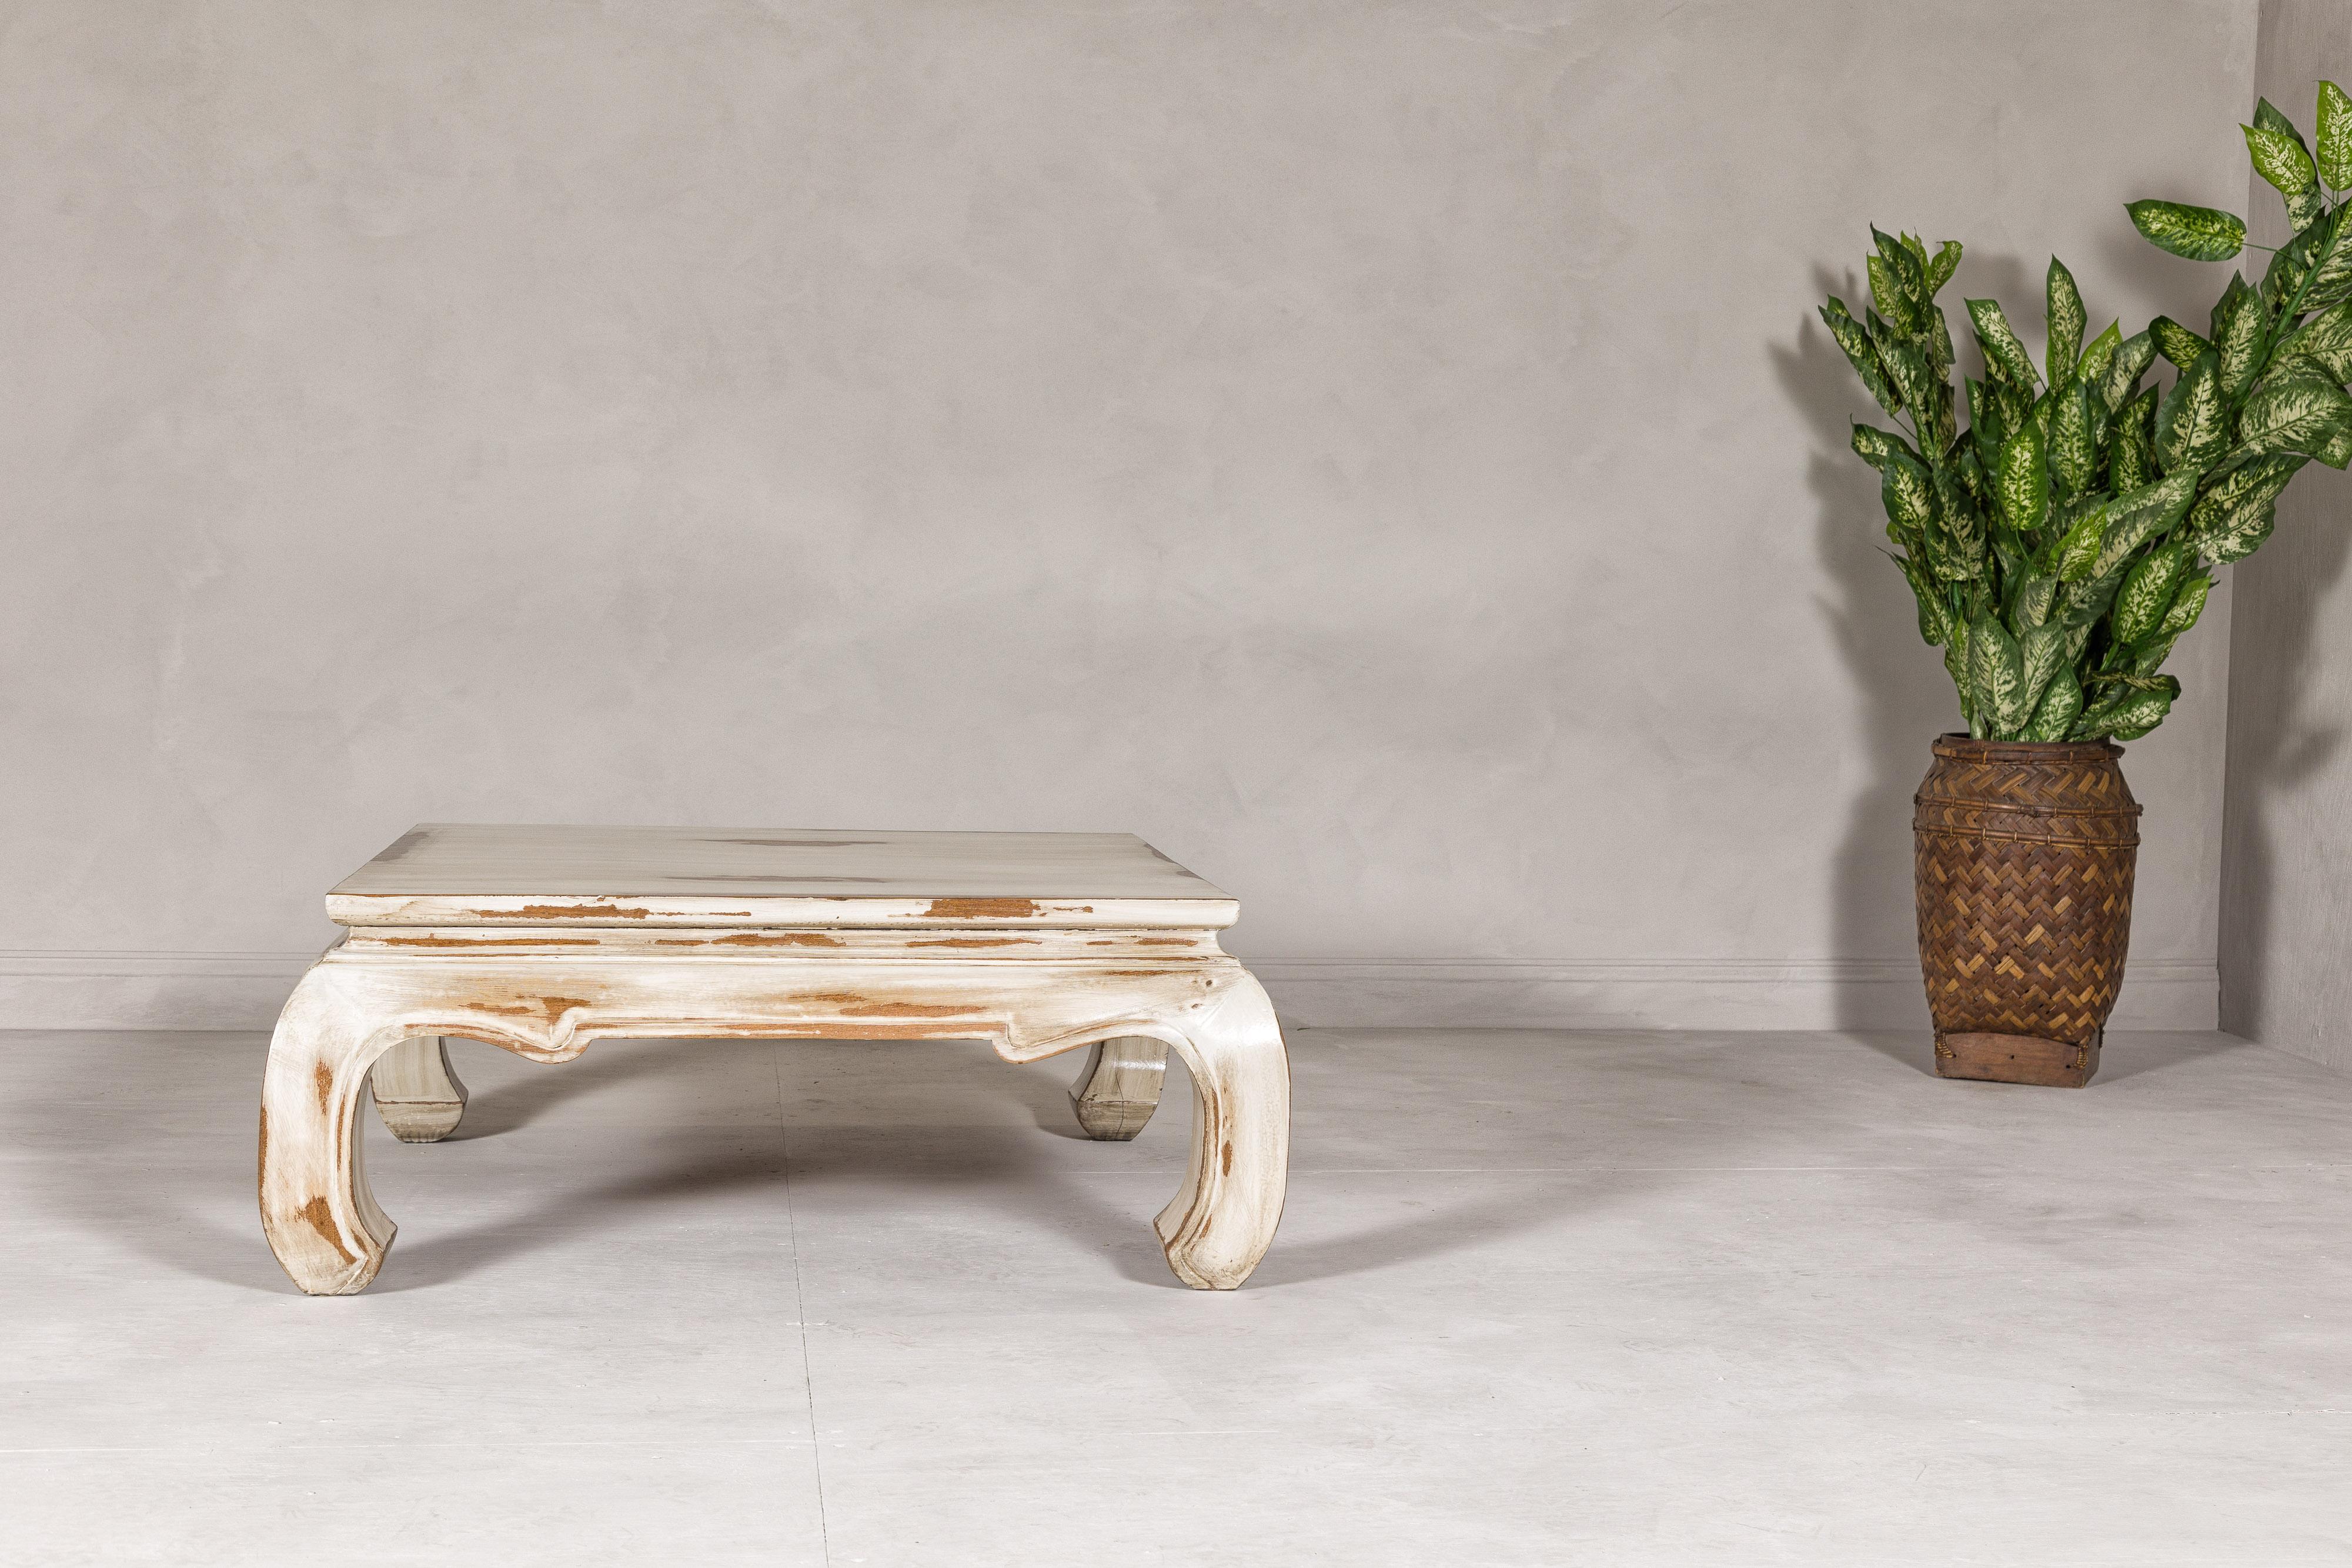 A vintage distressed white color coffee table from the 20th century with chow legs and square top. Experience a blend of history and elegance with this vintage coffee table from the 20th century, a delightful addition to any home seeking a touch of